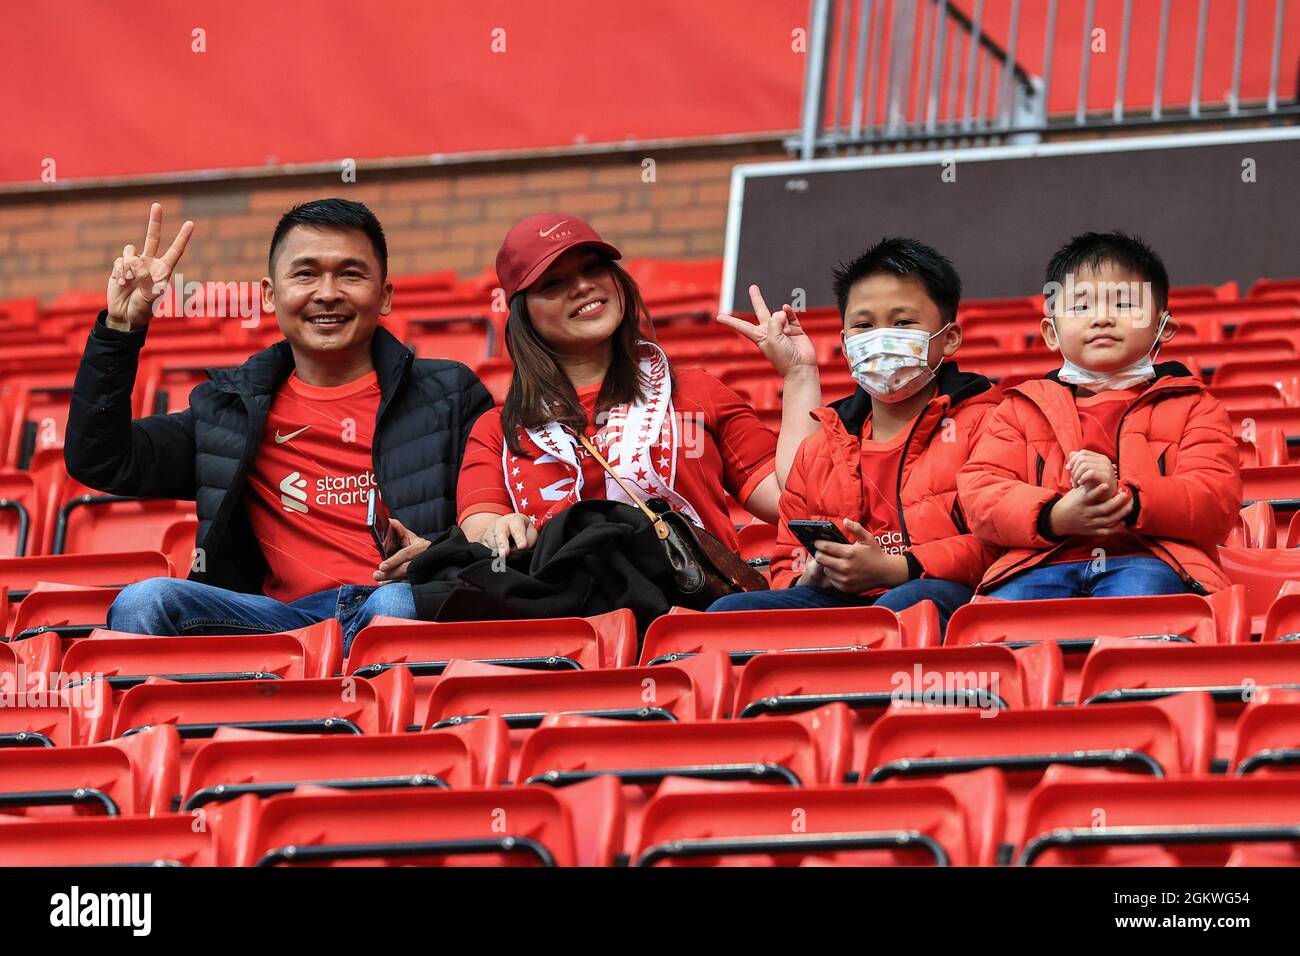 Liverpool, UK. 15th Sep, 2021. A family take to their seats as the gates of Anfield open for this evenings UEFA Champions League game, Liverpool v AC Milan in Liverpool, United Kingdom on 9/15/2021. (Photo by Mark Cosgrove/News Images/Sipa USA) Credit: Sipa USA/Alamy Live News Stock Photo